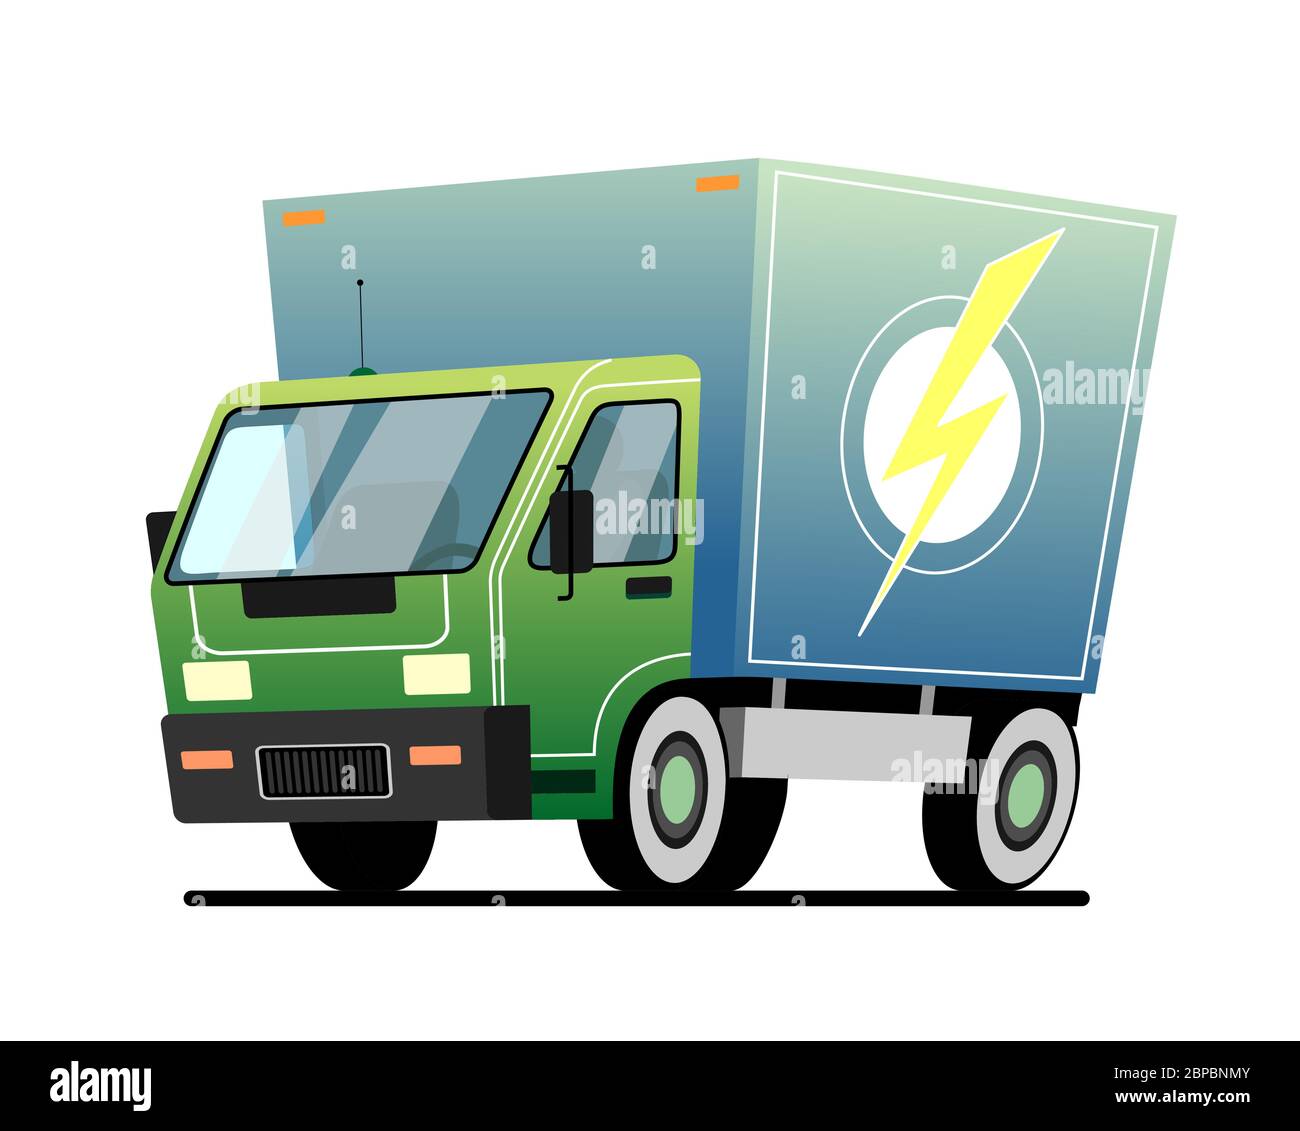 Vector small truck. Very fast, lightning fast delivery of goods, online orders, goods. Emblem in the form of a lightning on the side of the body. Cart Stock Vector